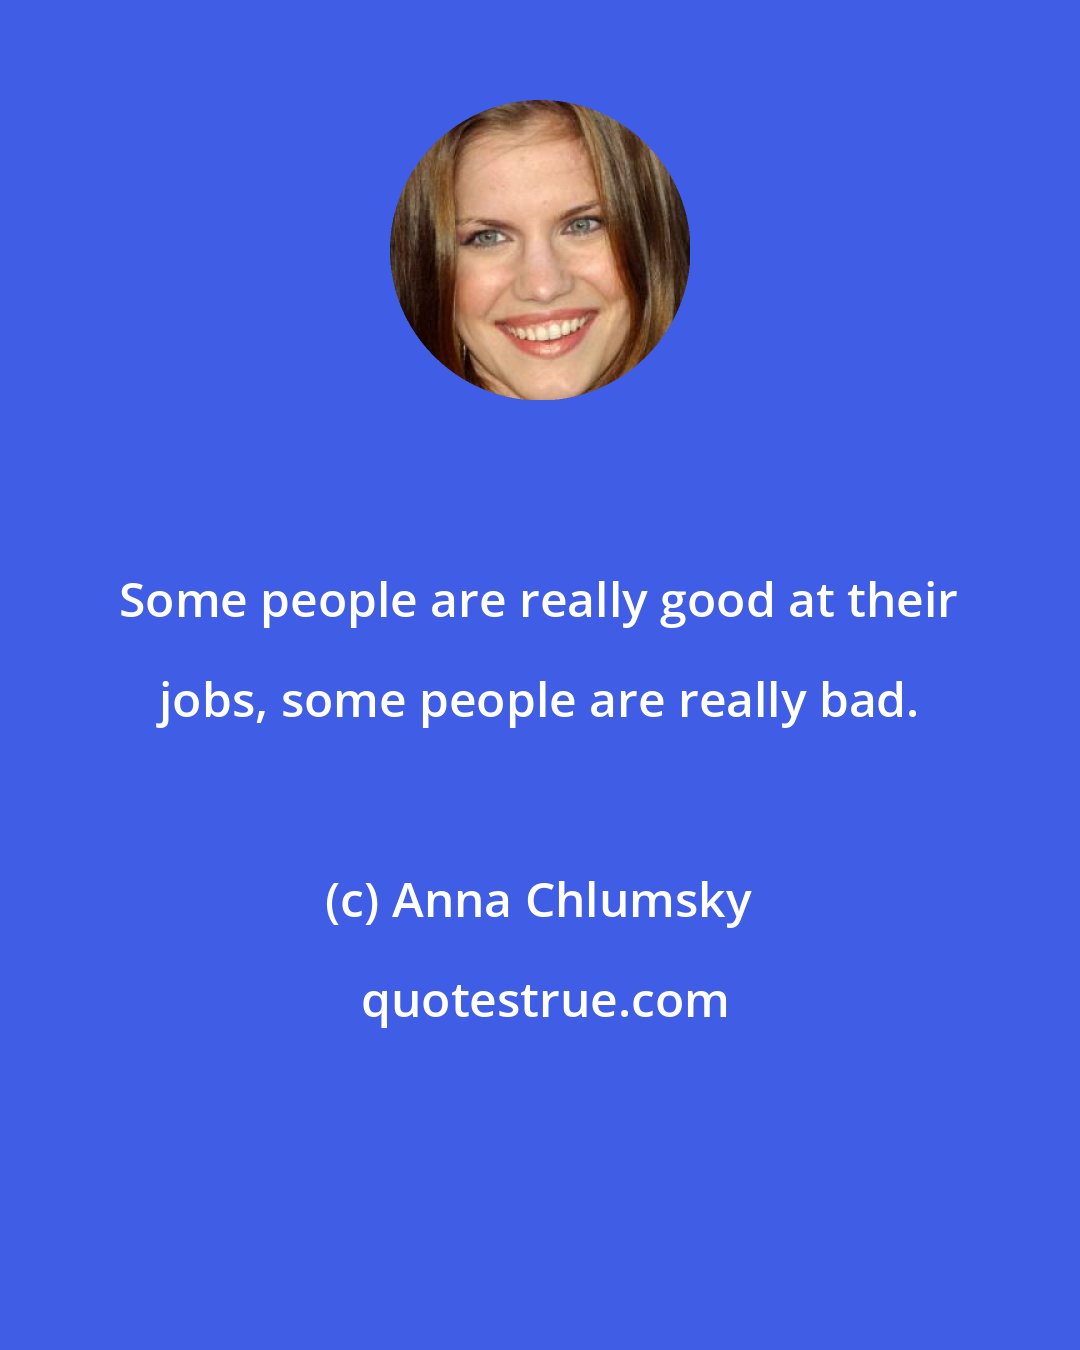 Anna Chlumsky: Some people are really good at their jobs, some people are really bad.